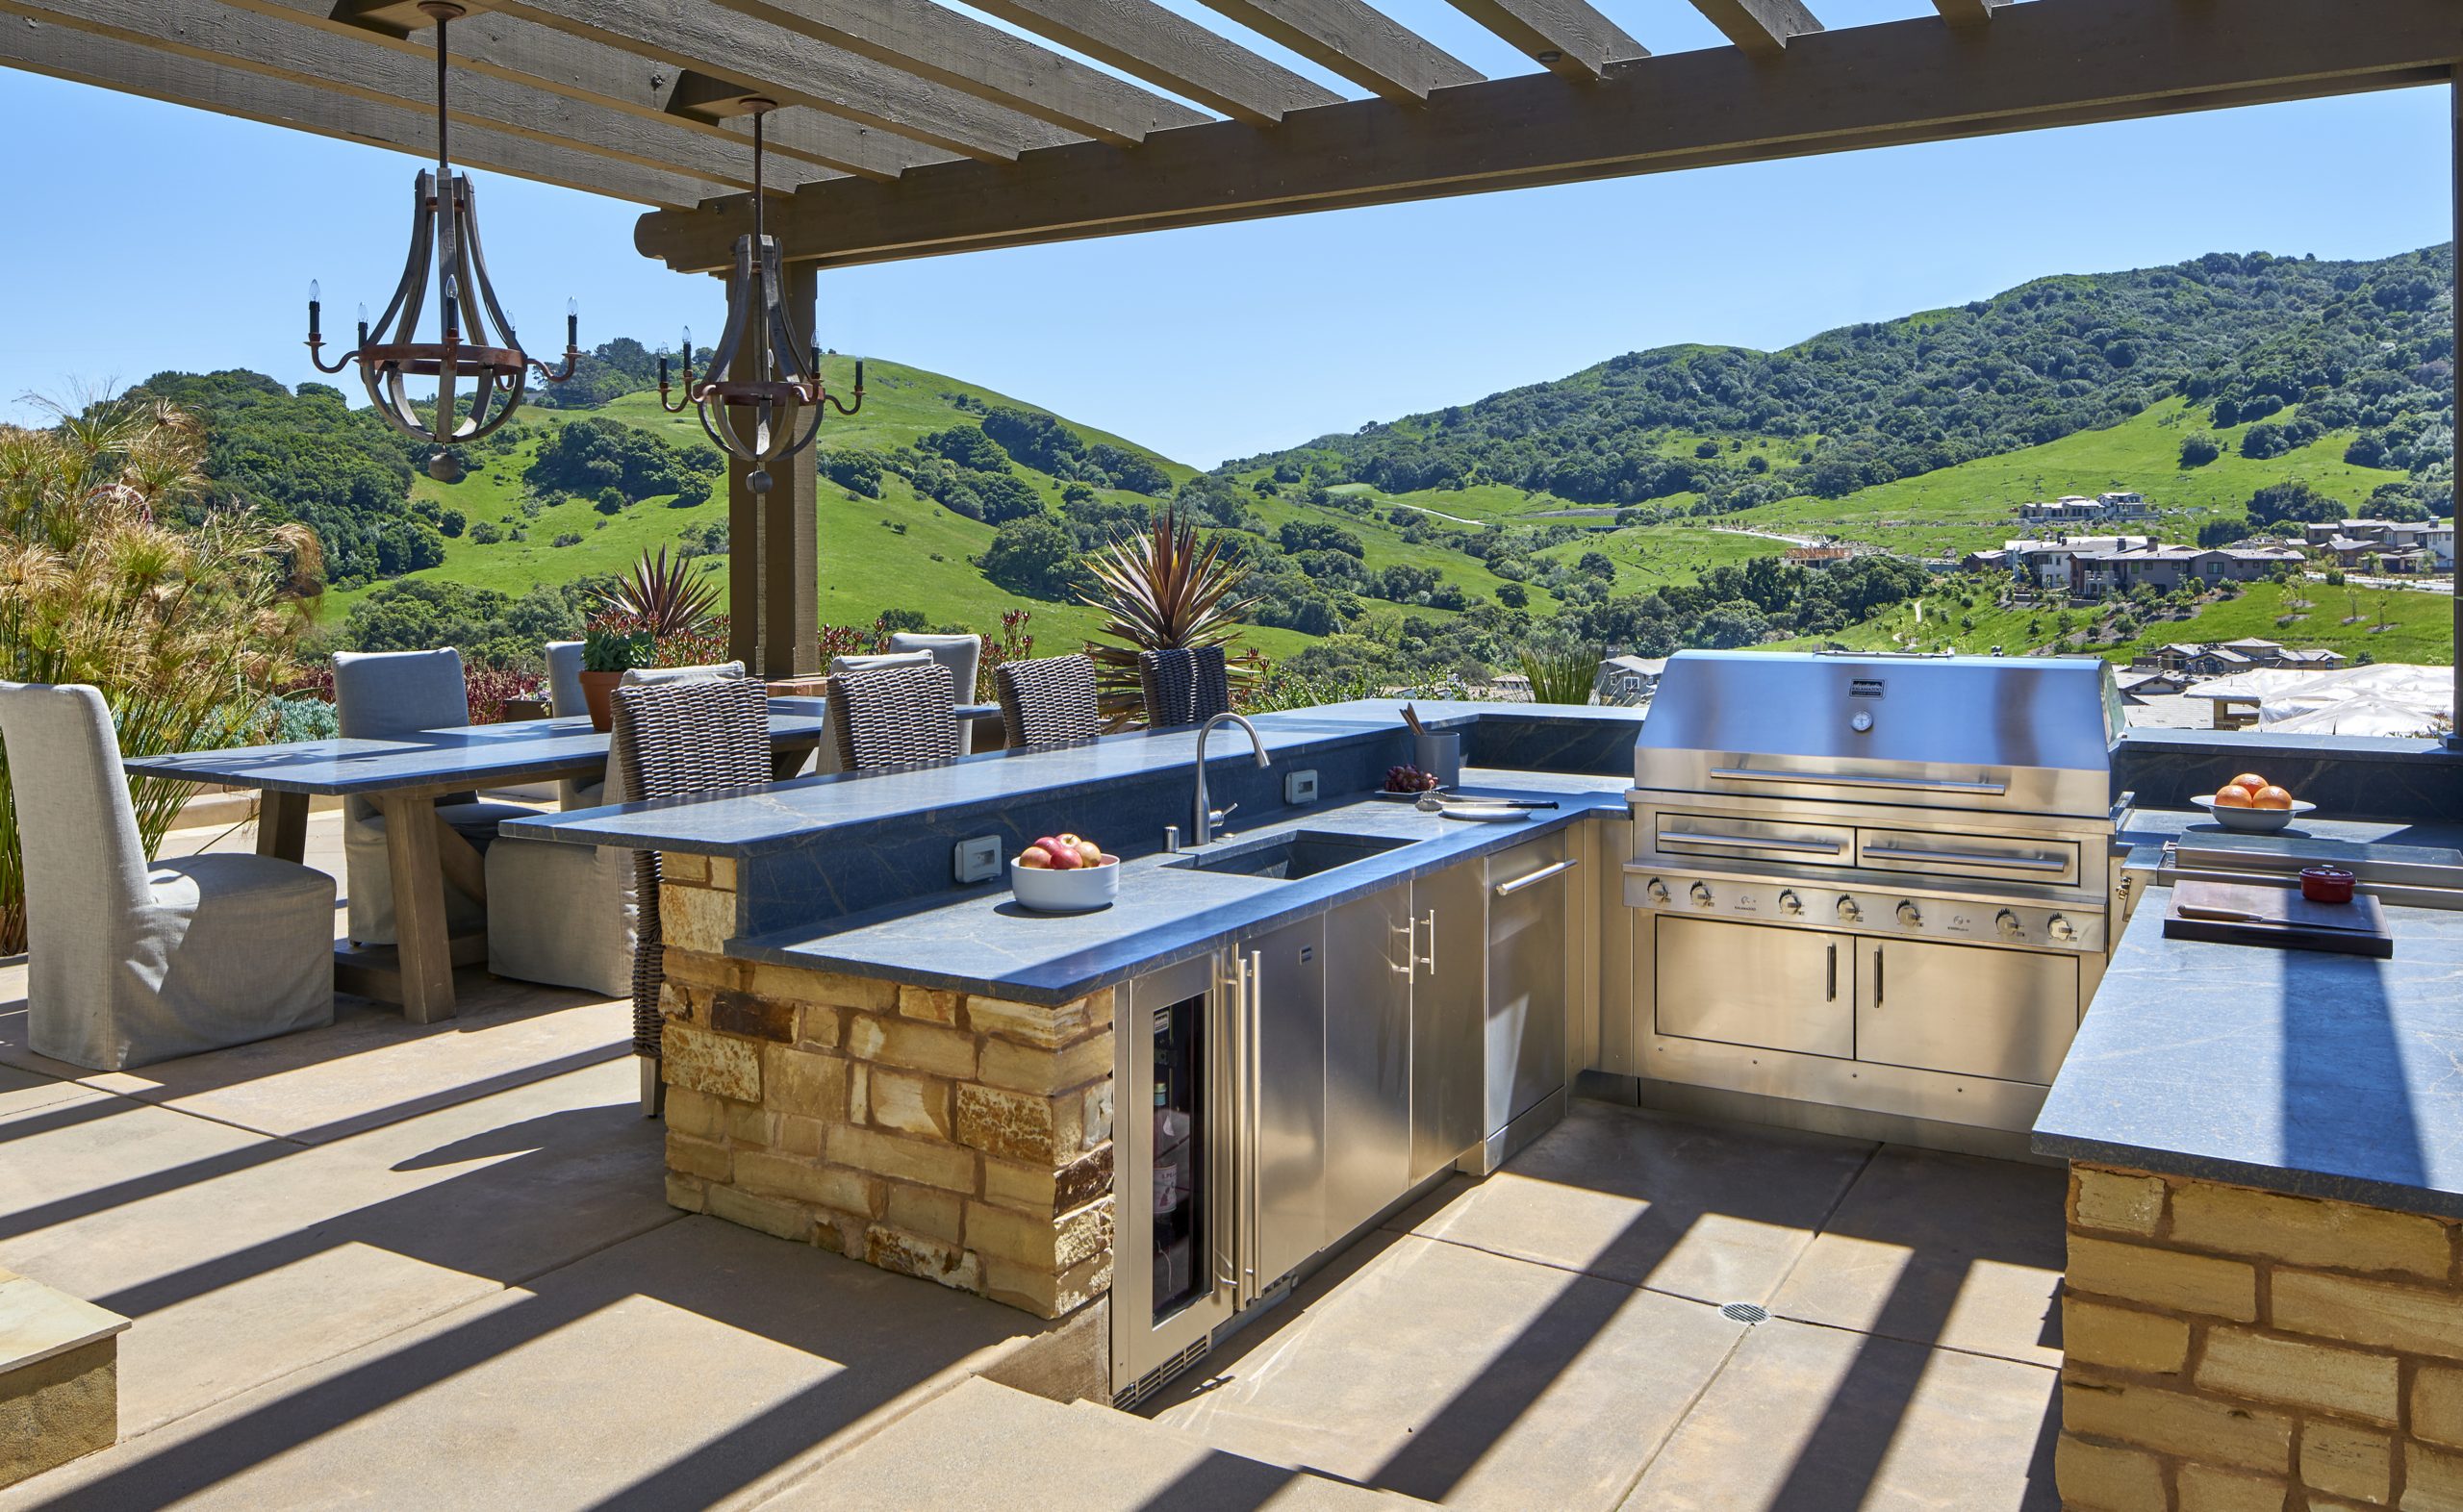 Why are outdoor living spaces essential?